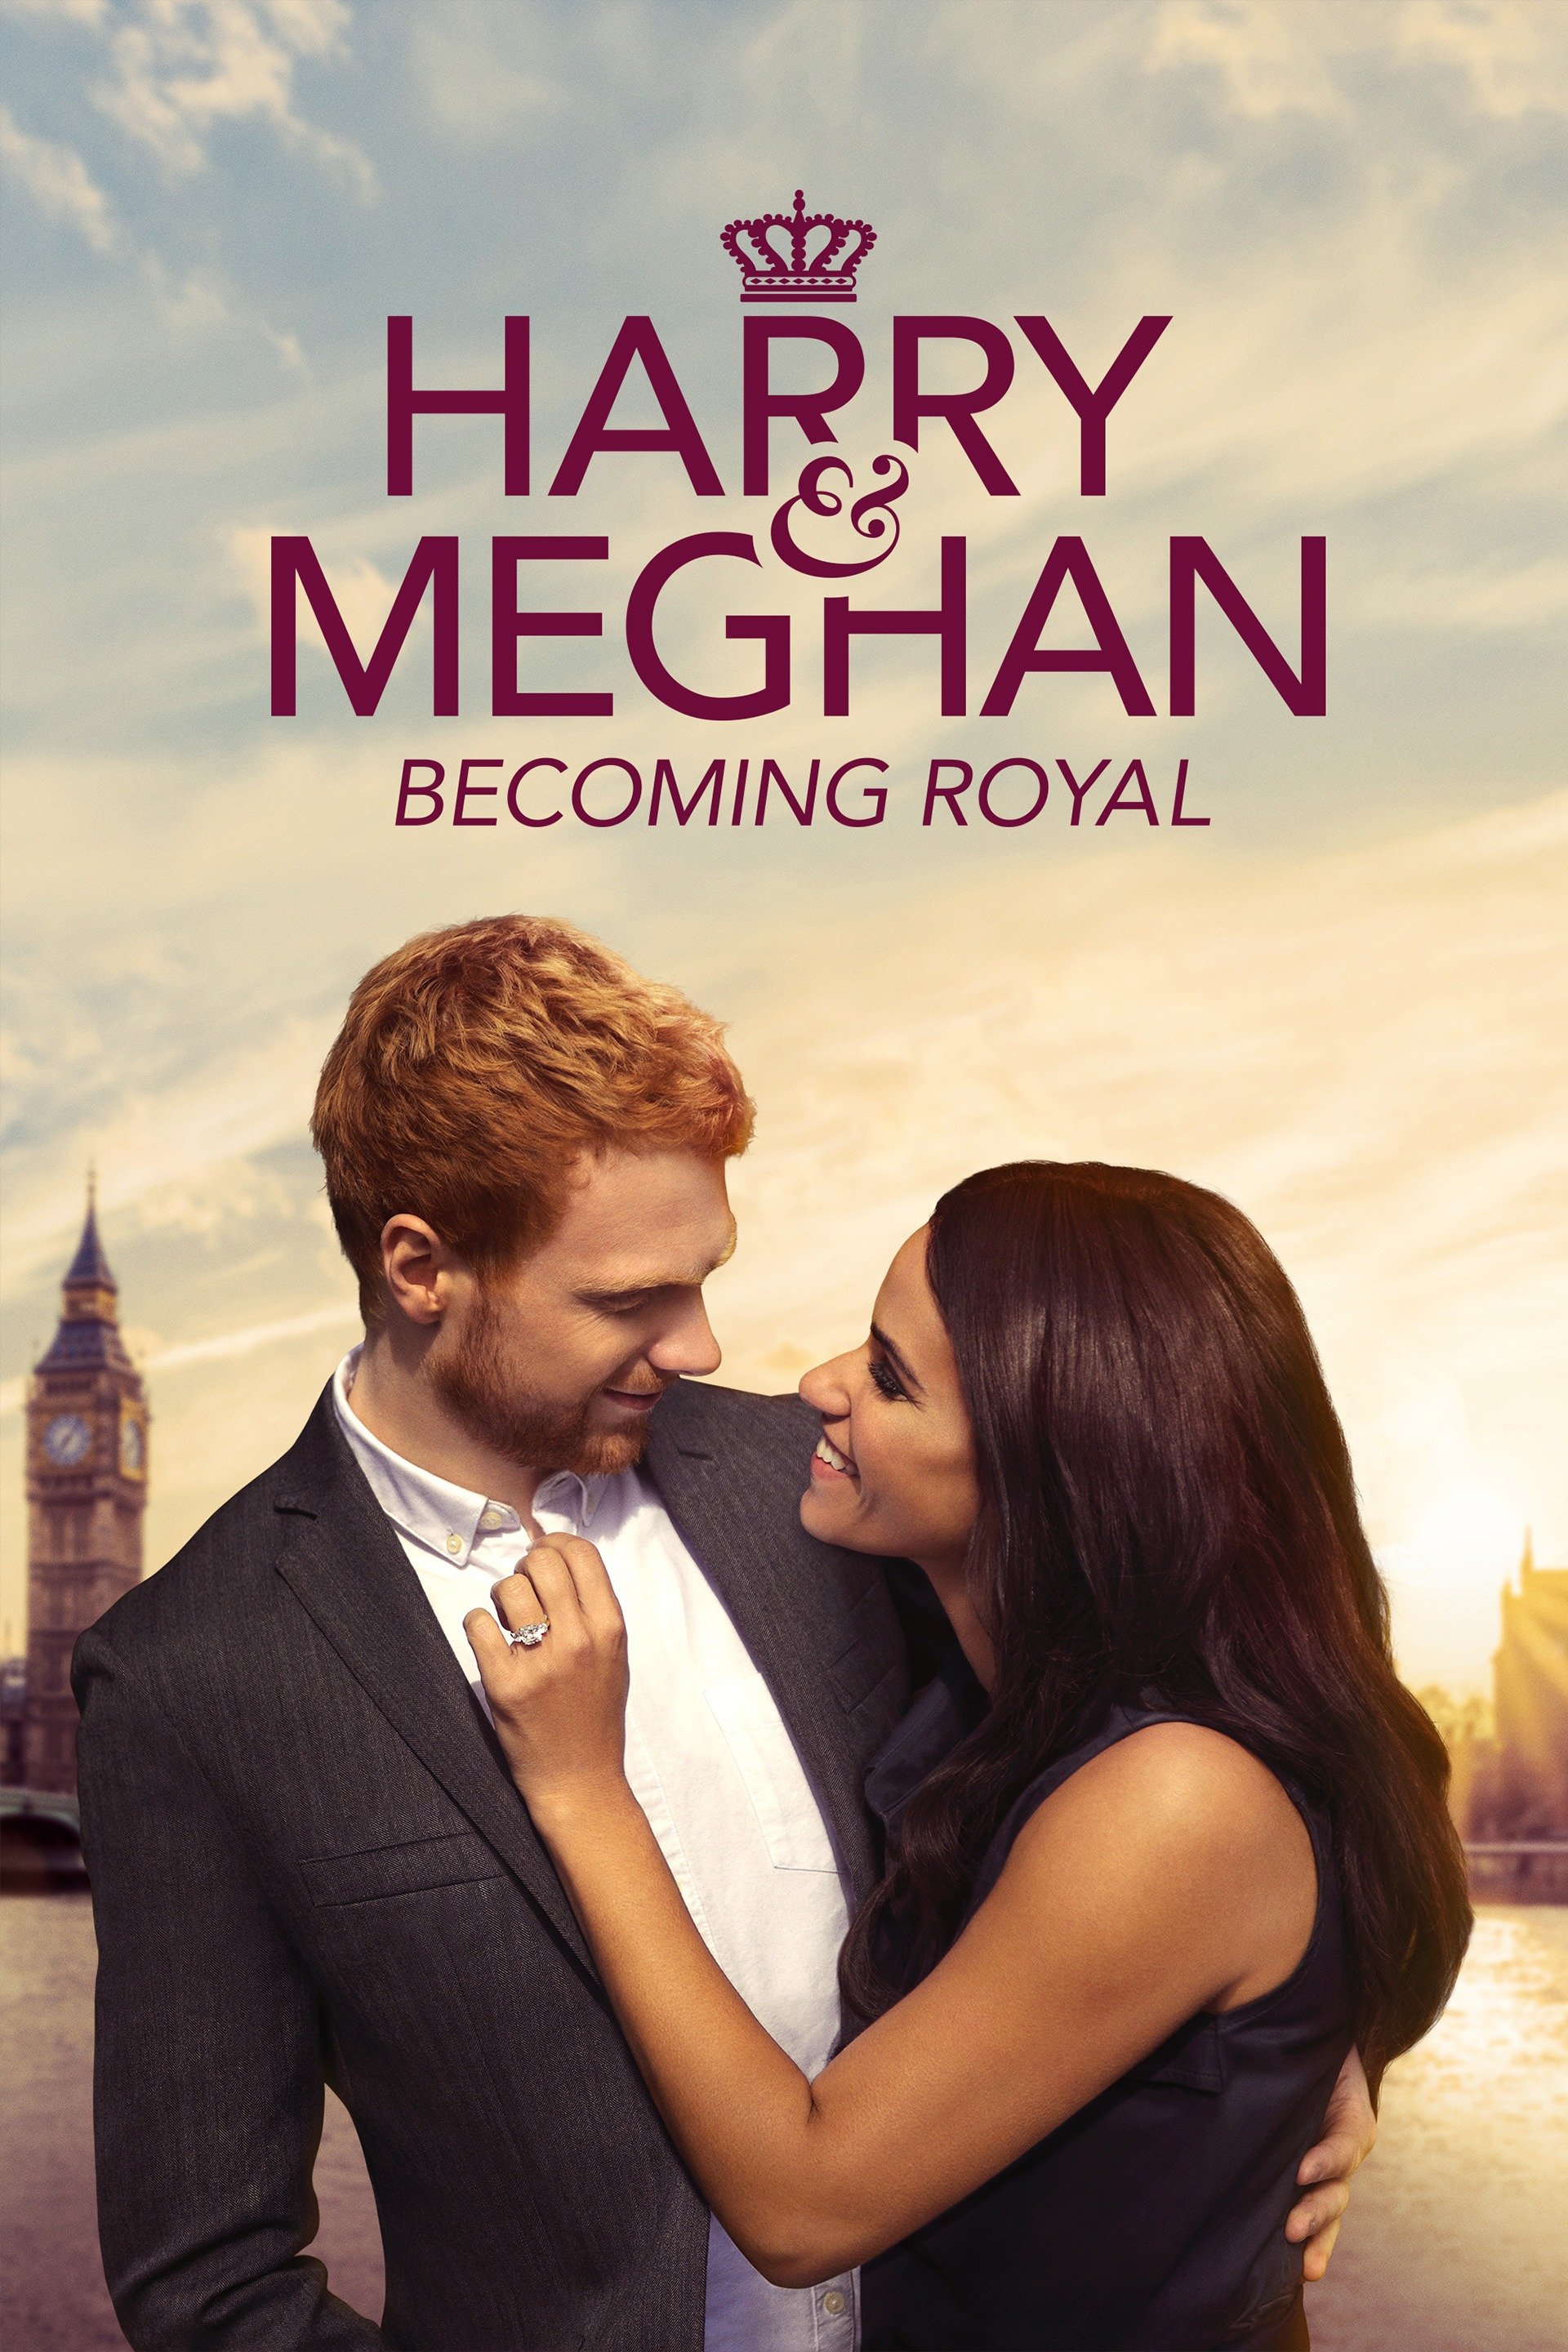 Imdb Harry And Meghan Harry & Meghan: Becoming Royal - Rotten Tomatoes